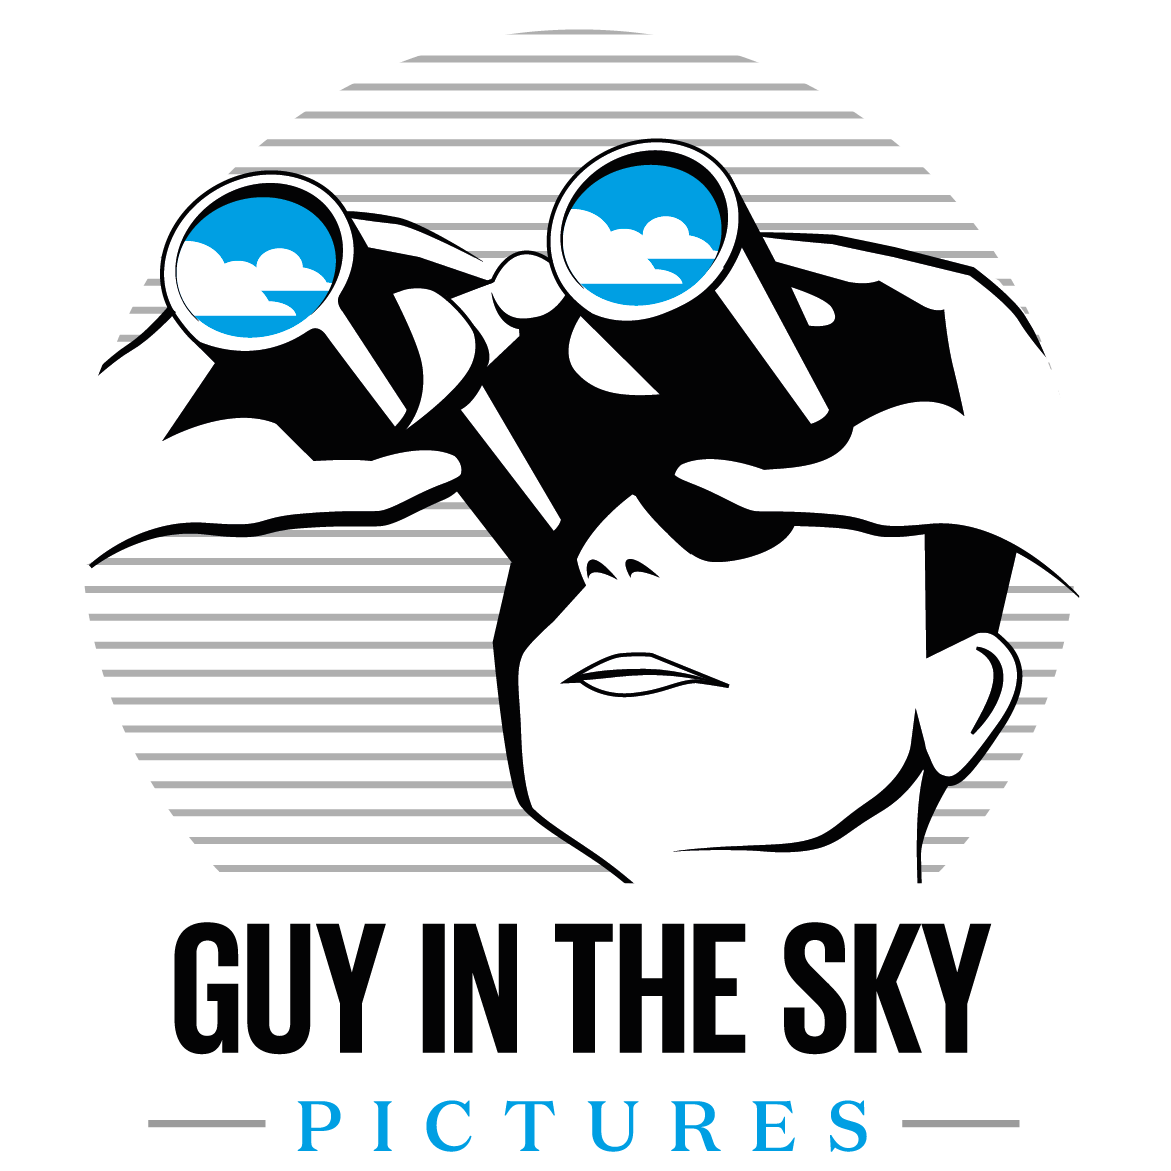 Guy in the Sky Pictures